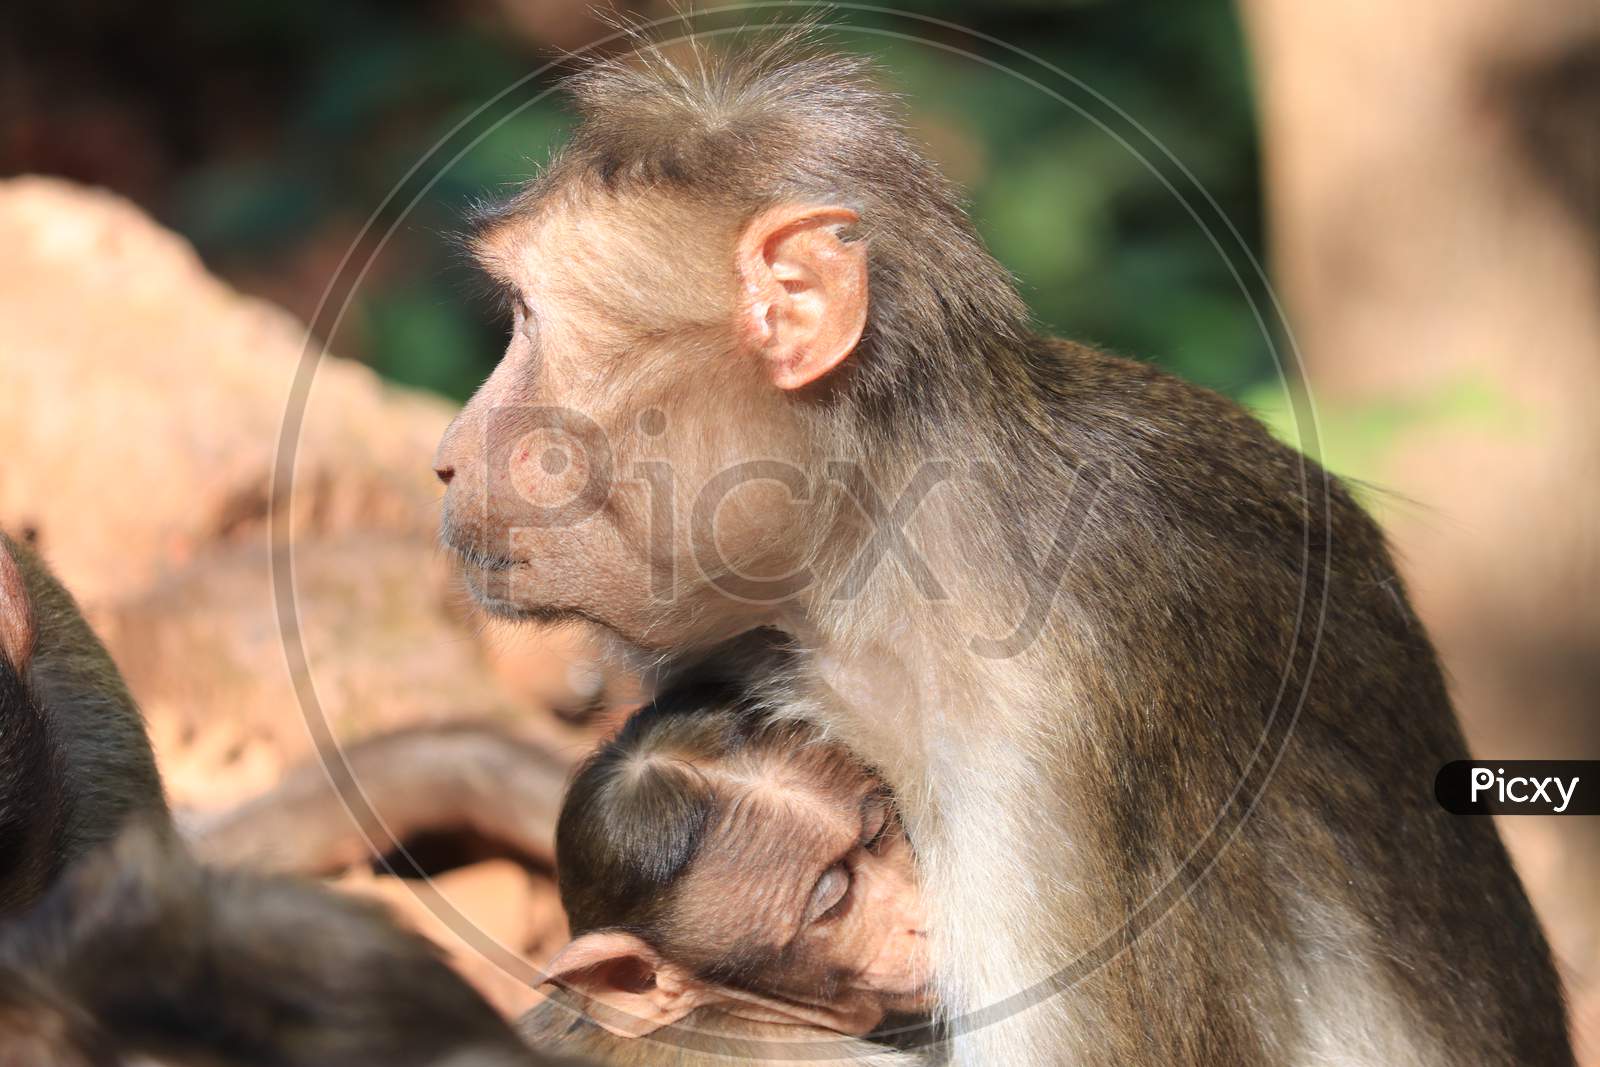 Mother's Love: Mother monkey with her child monkey resting in his arms, warm of love